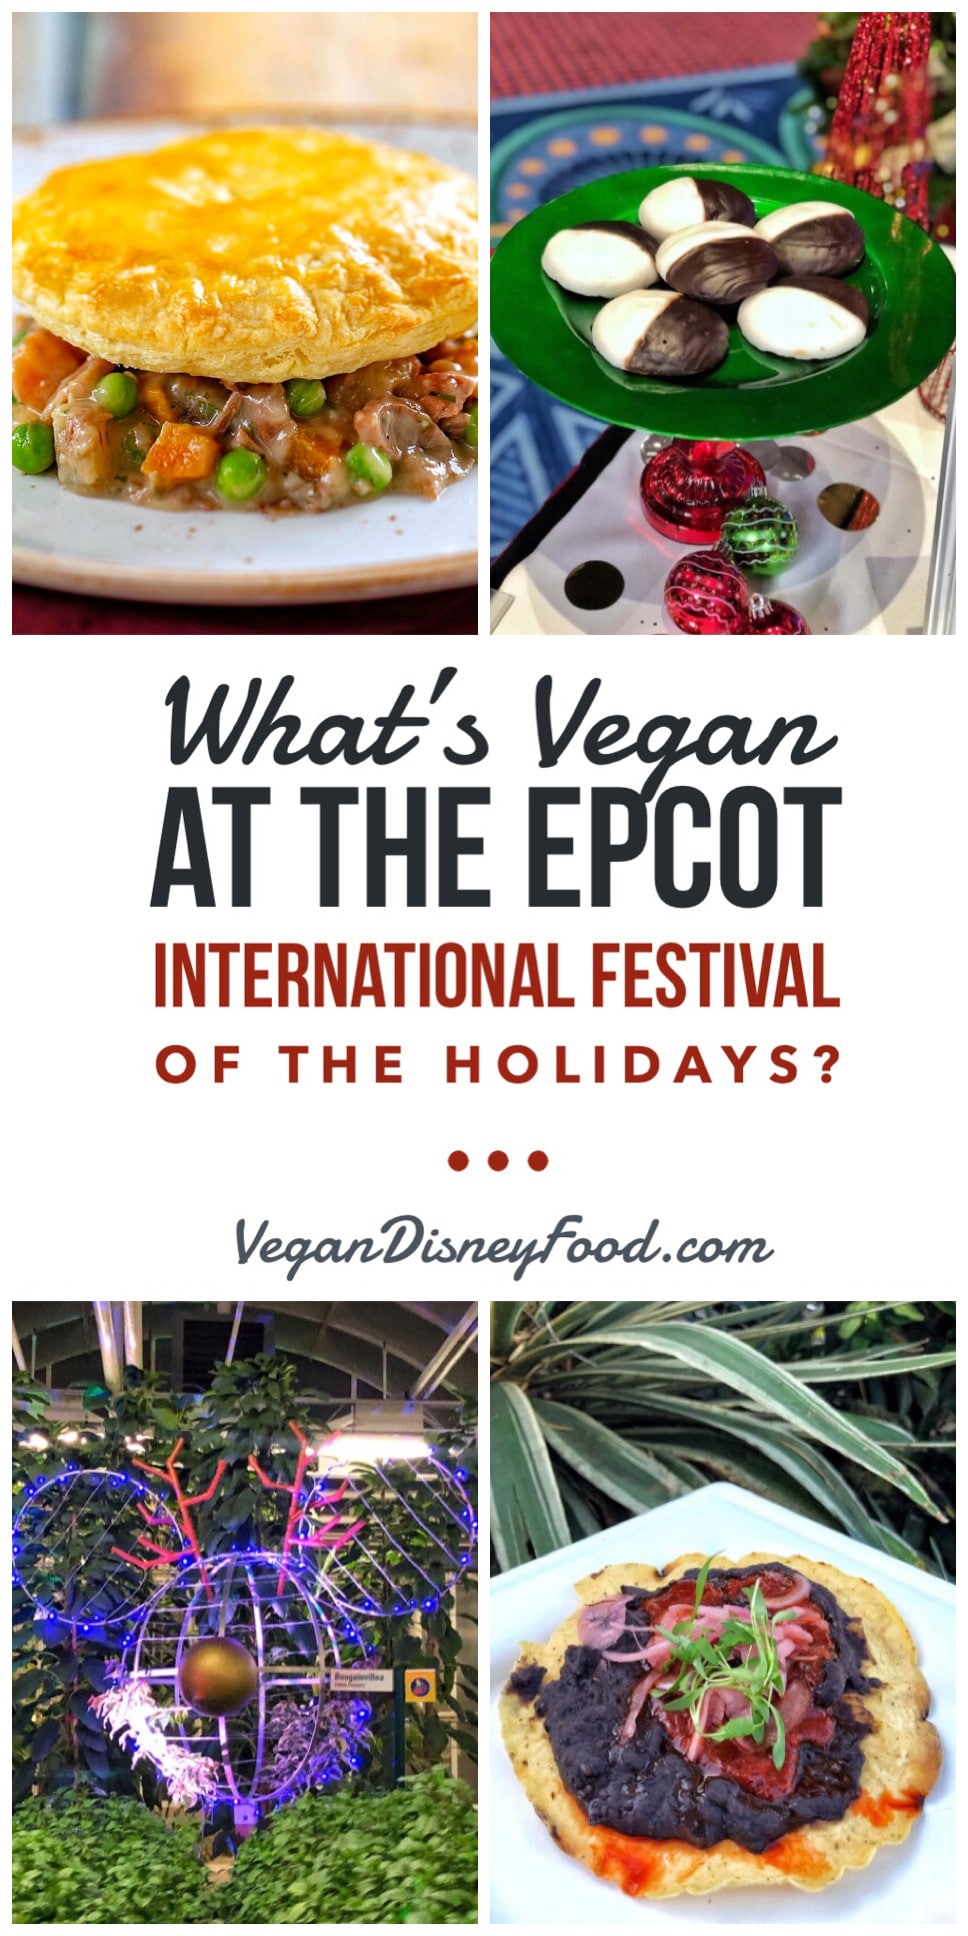 What’s Vegan at the Epcot International Festival of the Holidays in Walt Disney World?